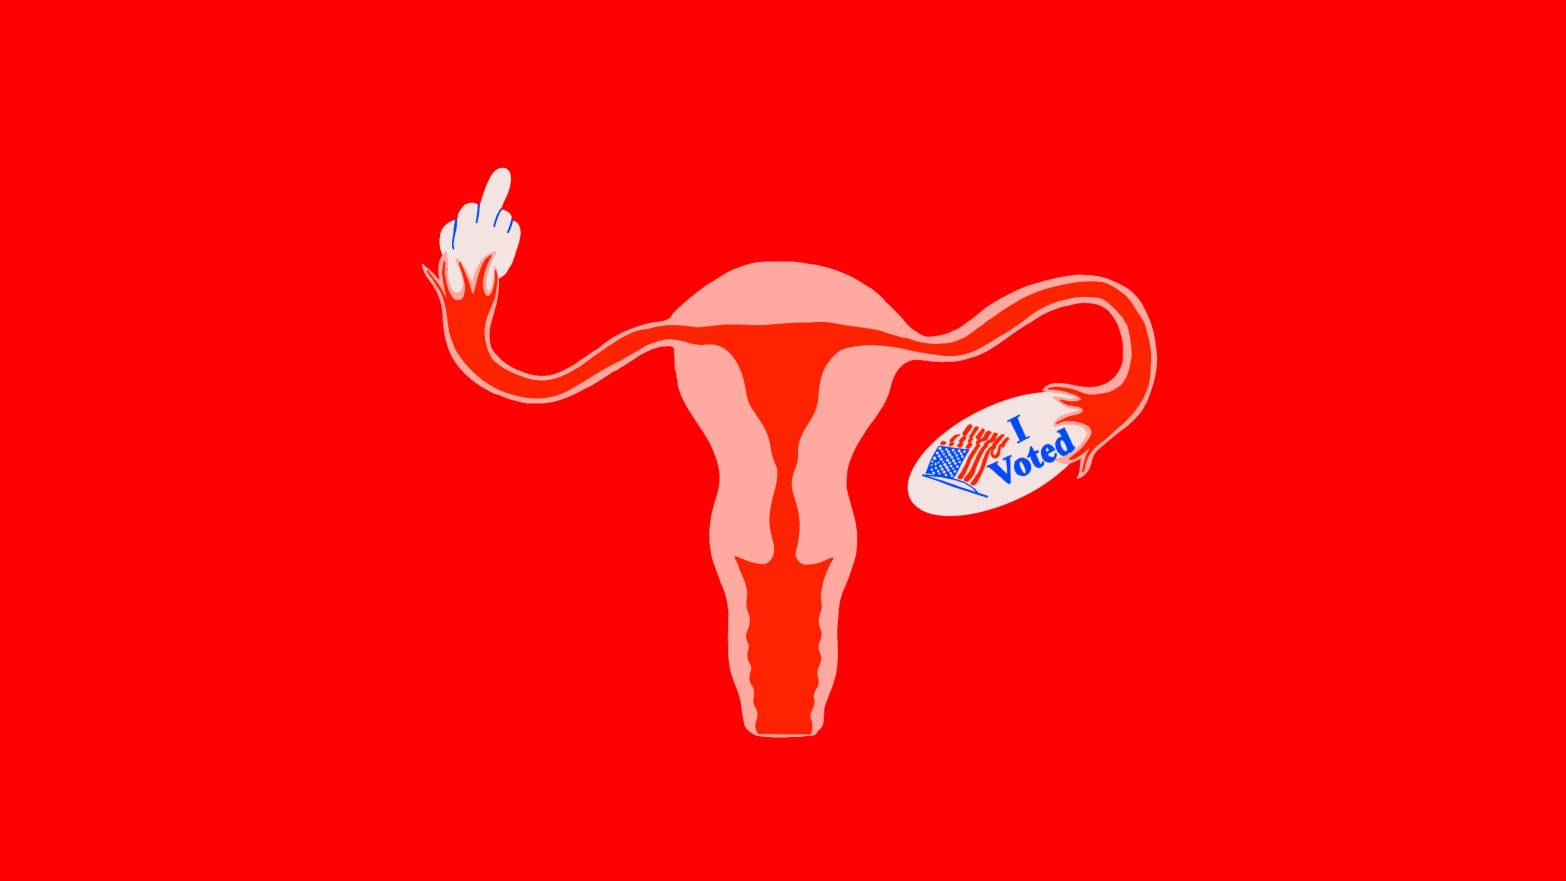 image of uterus giving middle finger and i voted sticker